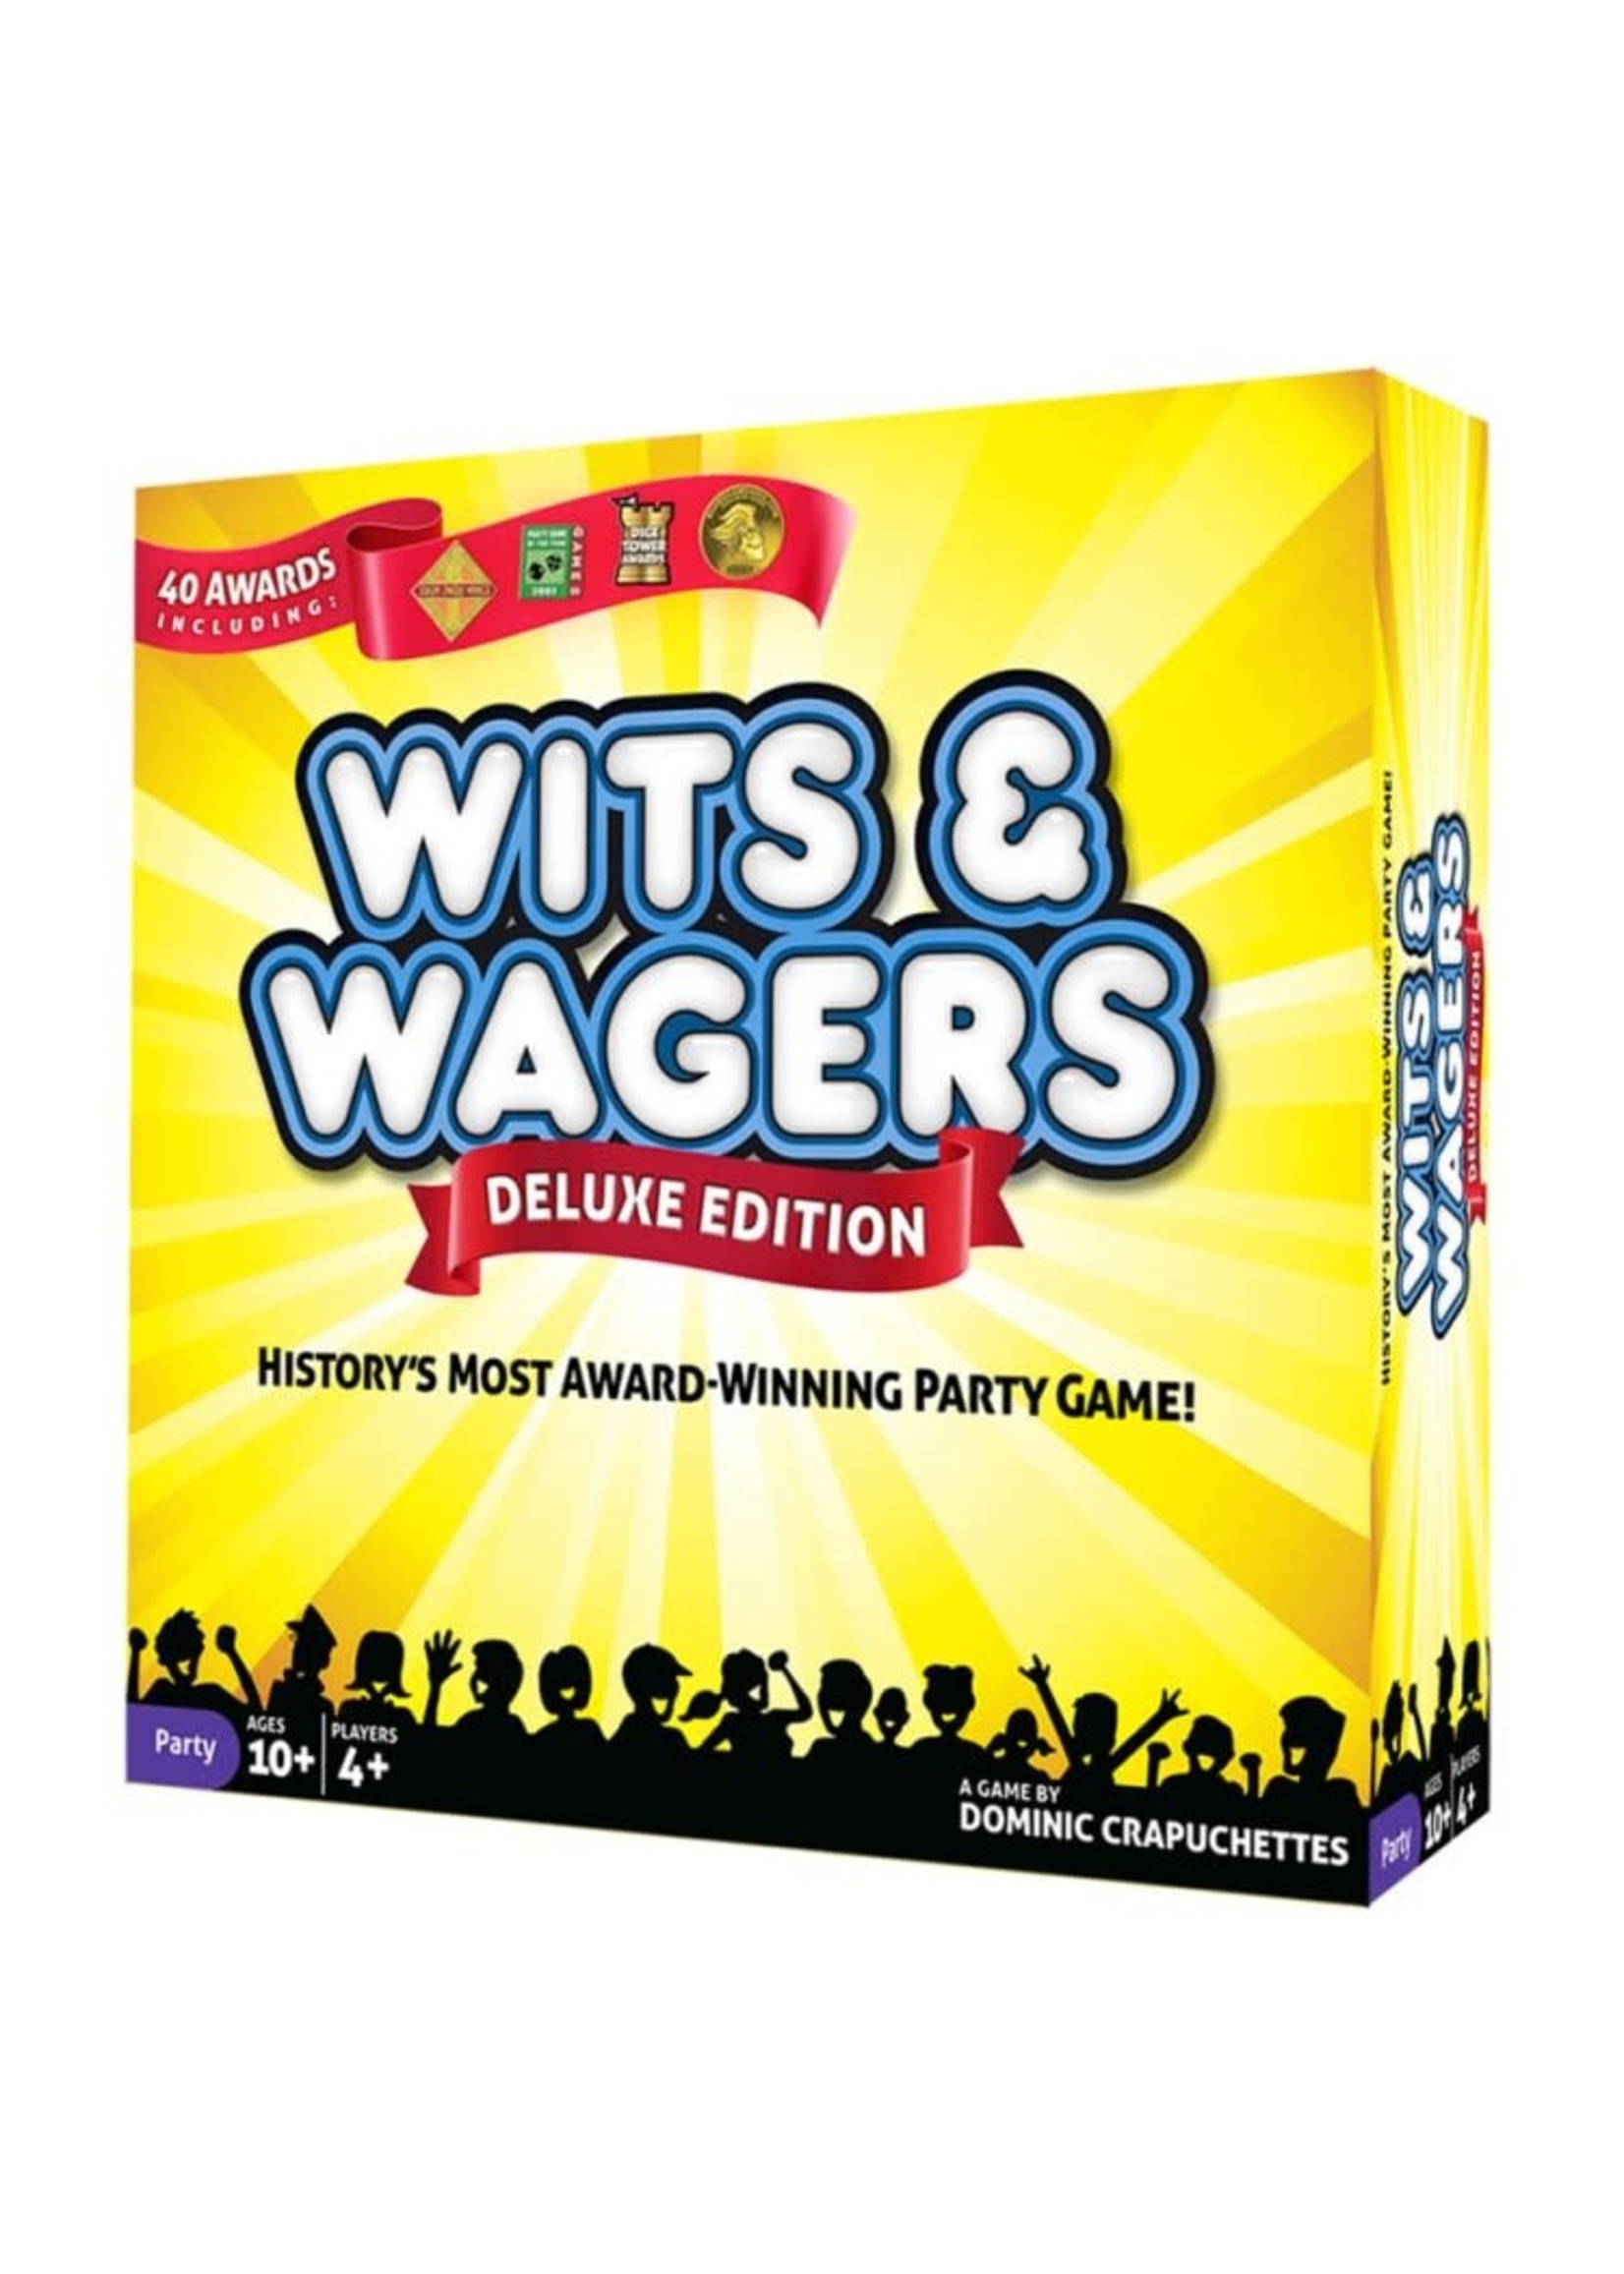 Rental RENTAL - Wits & Wagers Deluxe 2lb 11.7oz